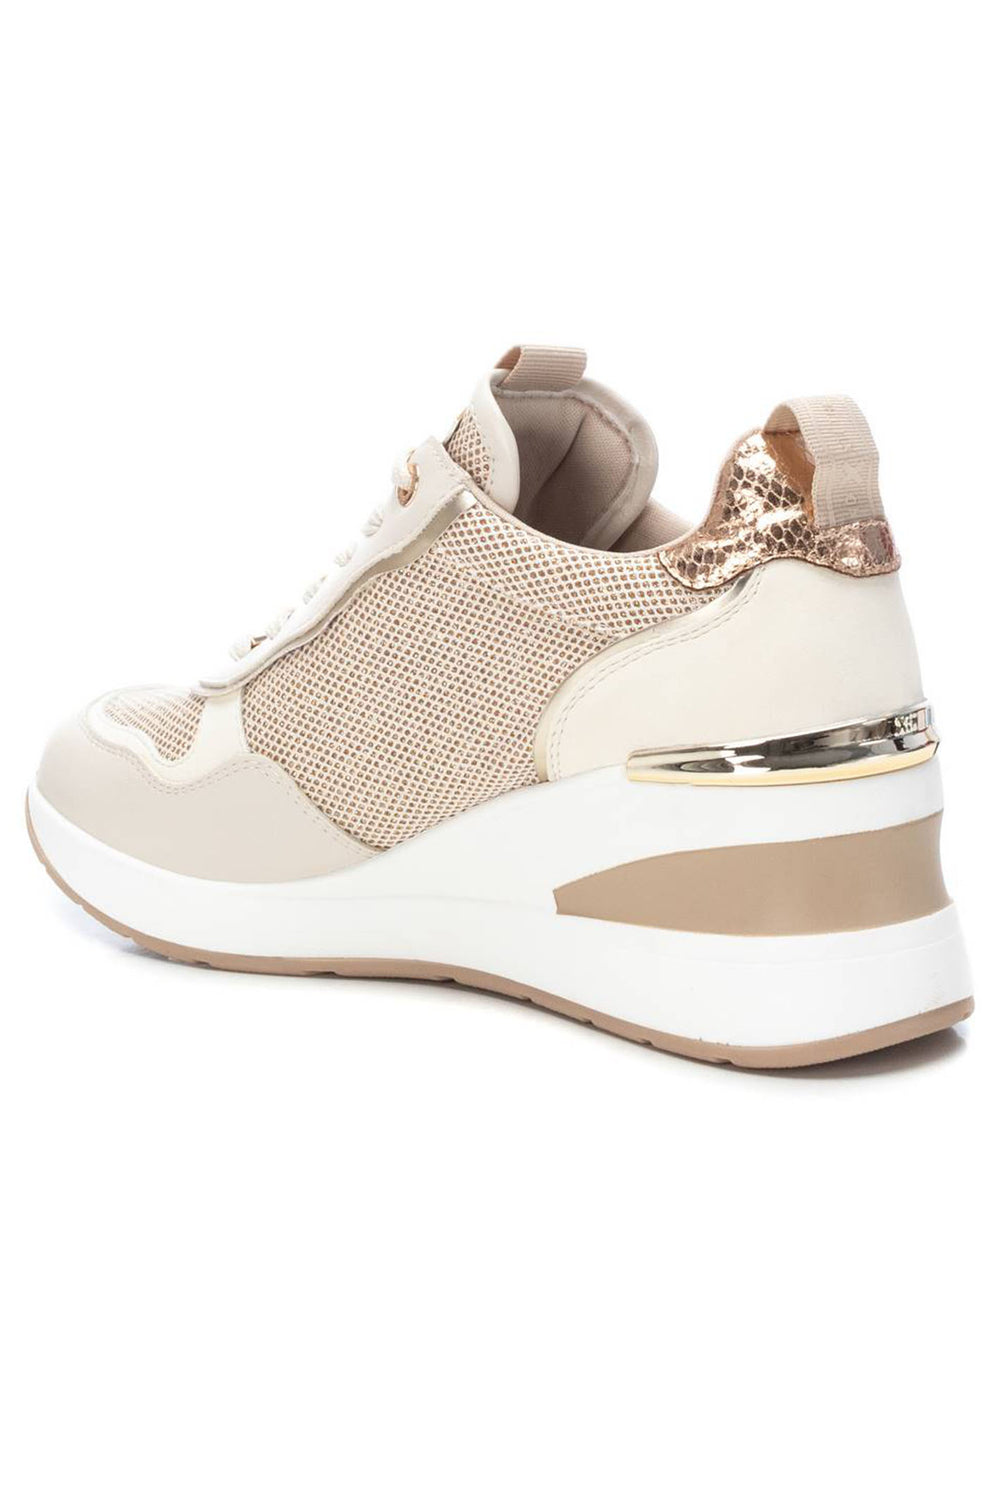 XTI 14240801 Gold Shimmer Wedge Trainers - Experience Boutique